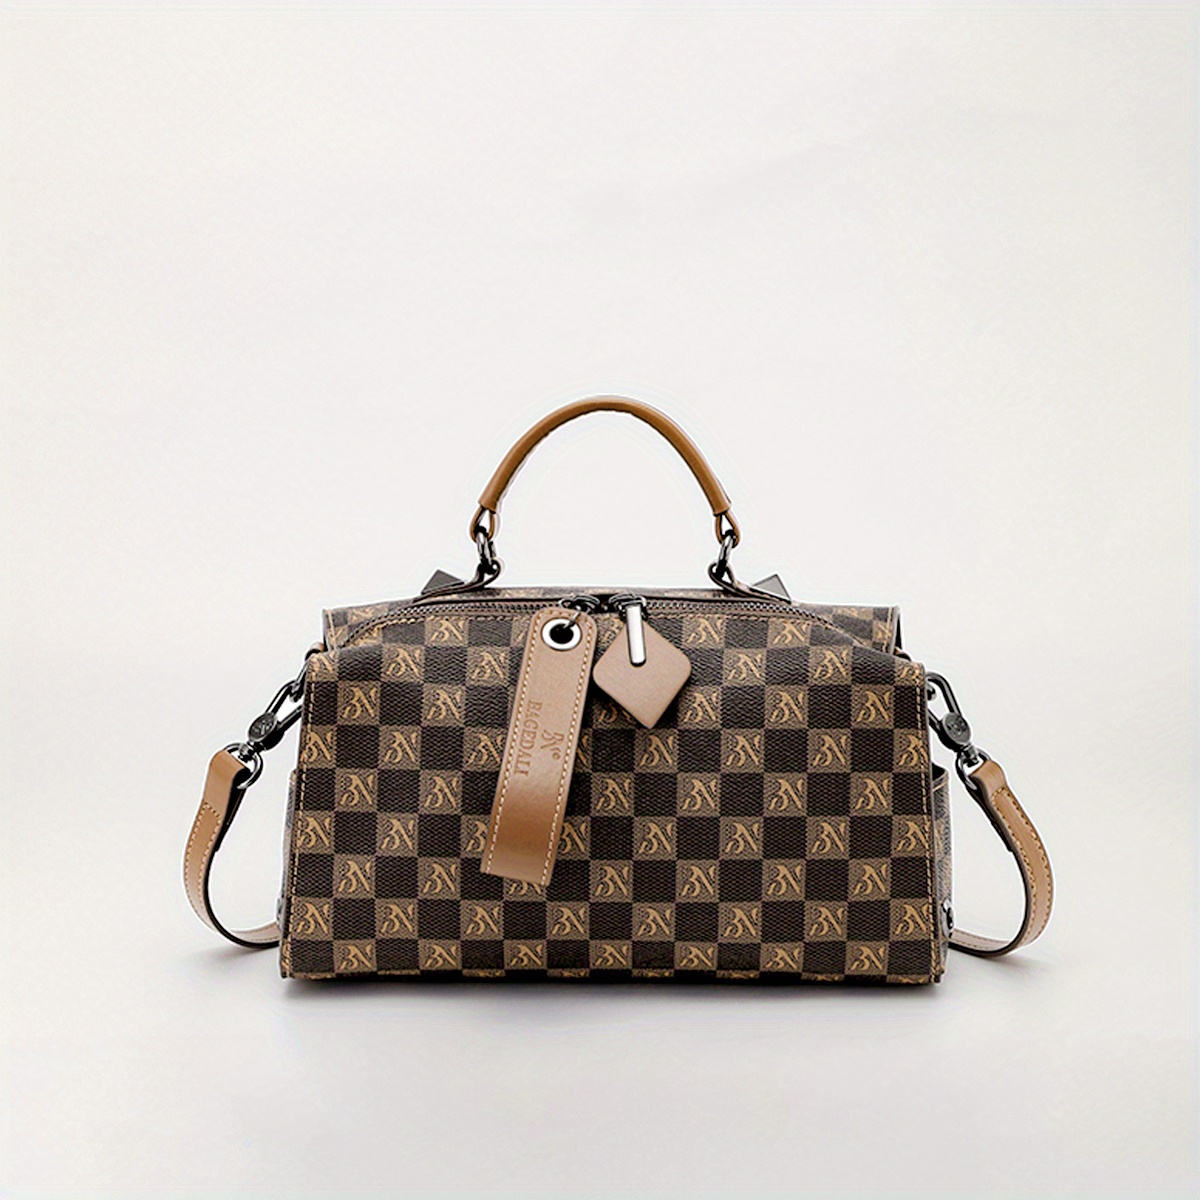 Louis Vuitton 2 Damier with Veg Tan Leather Face mask use together